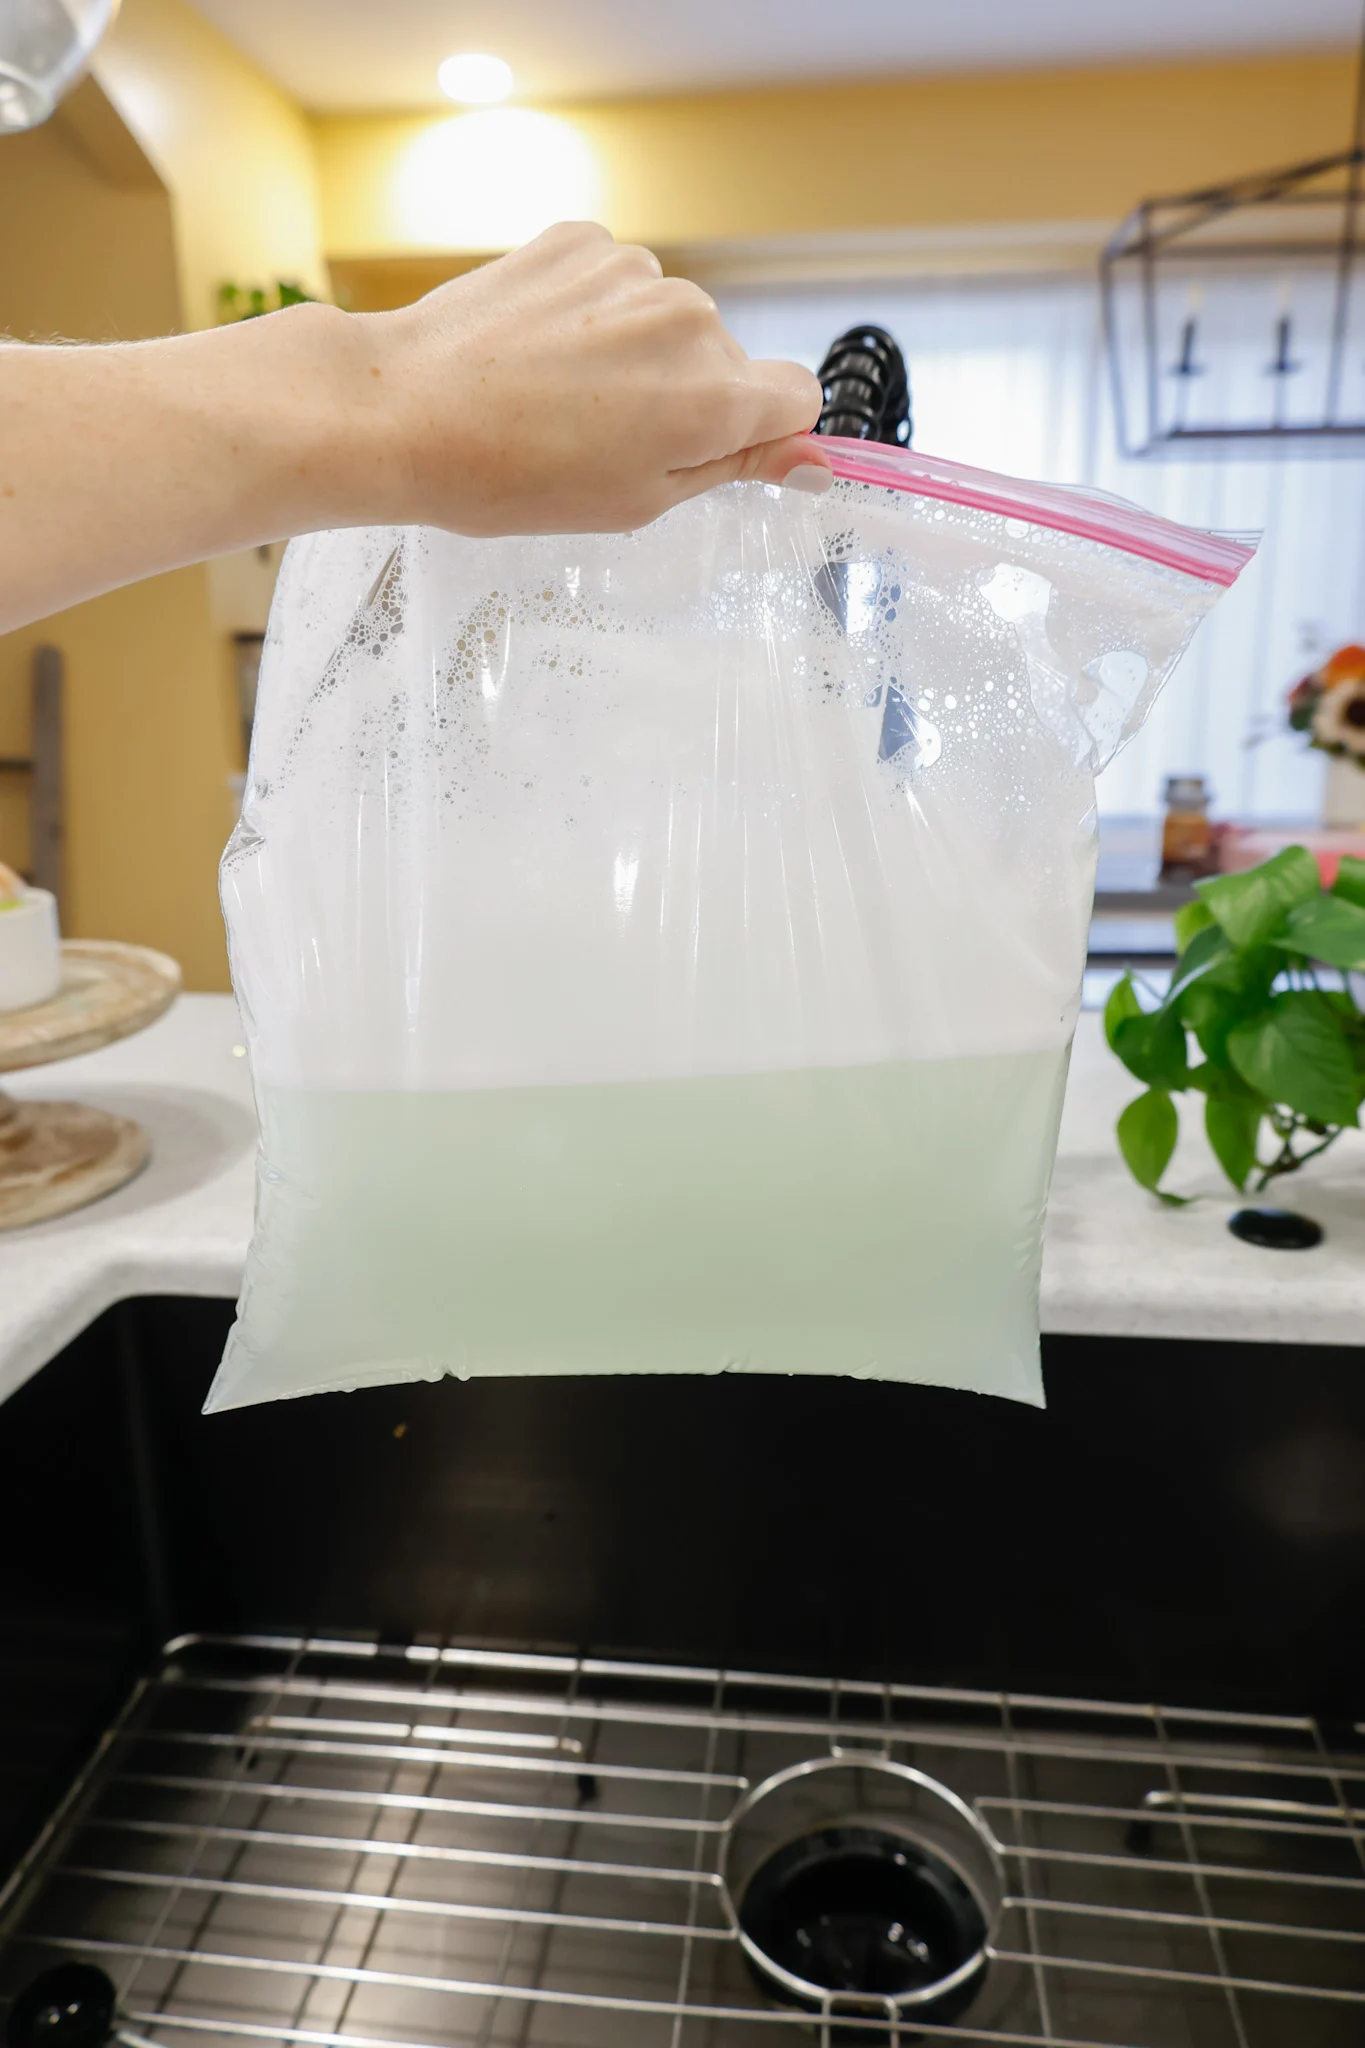 dish soap, baking soda, and hot water in gallon size bag